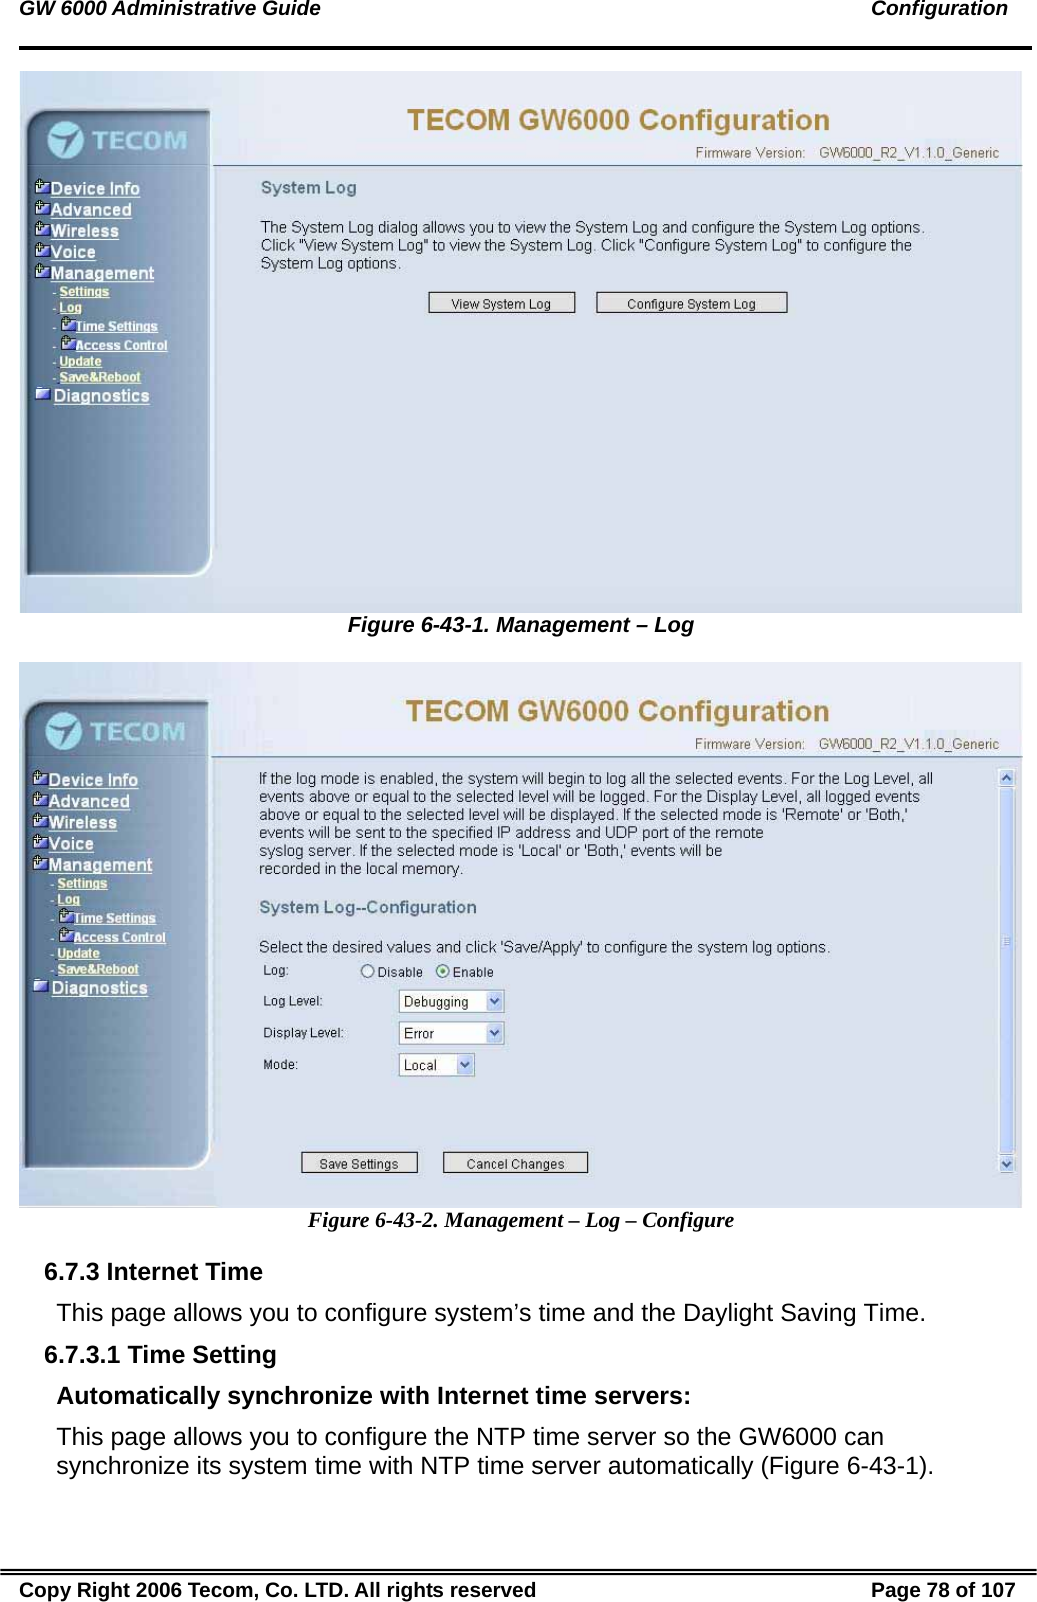 GW 6000 Administrative Guide                                                                                               Configuration  Figure 6-43-1. Management – Log   Figure 6-43-2. Management – Log – Configure 6.7.3 Internet Time This page allows you to configure system’s time and the Daylight Saving Time.  6.7.3.1 Time Setting Automatically synchronize with Internet time servers: This page allows you to configure the NTP time server so the GW6000 can synchronize its system time with NTP time server automatically (Figure 6-43-1).  Copy Right 2006 Tecom, Co. LTD. All rights reserved  Page 78 of 107 